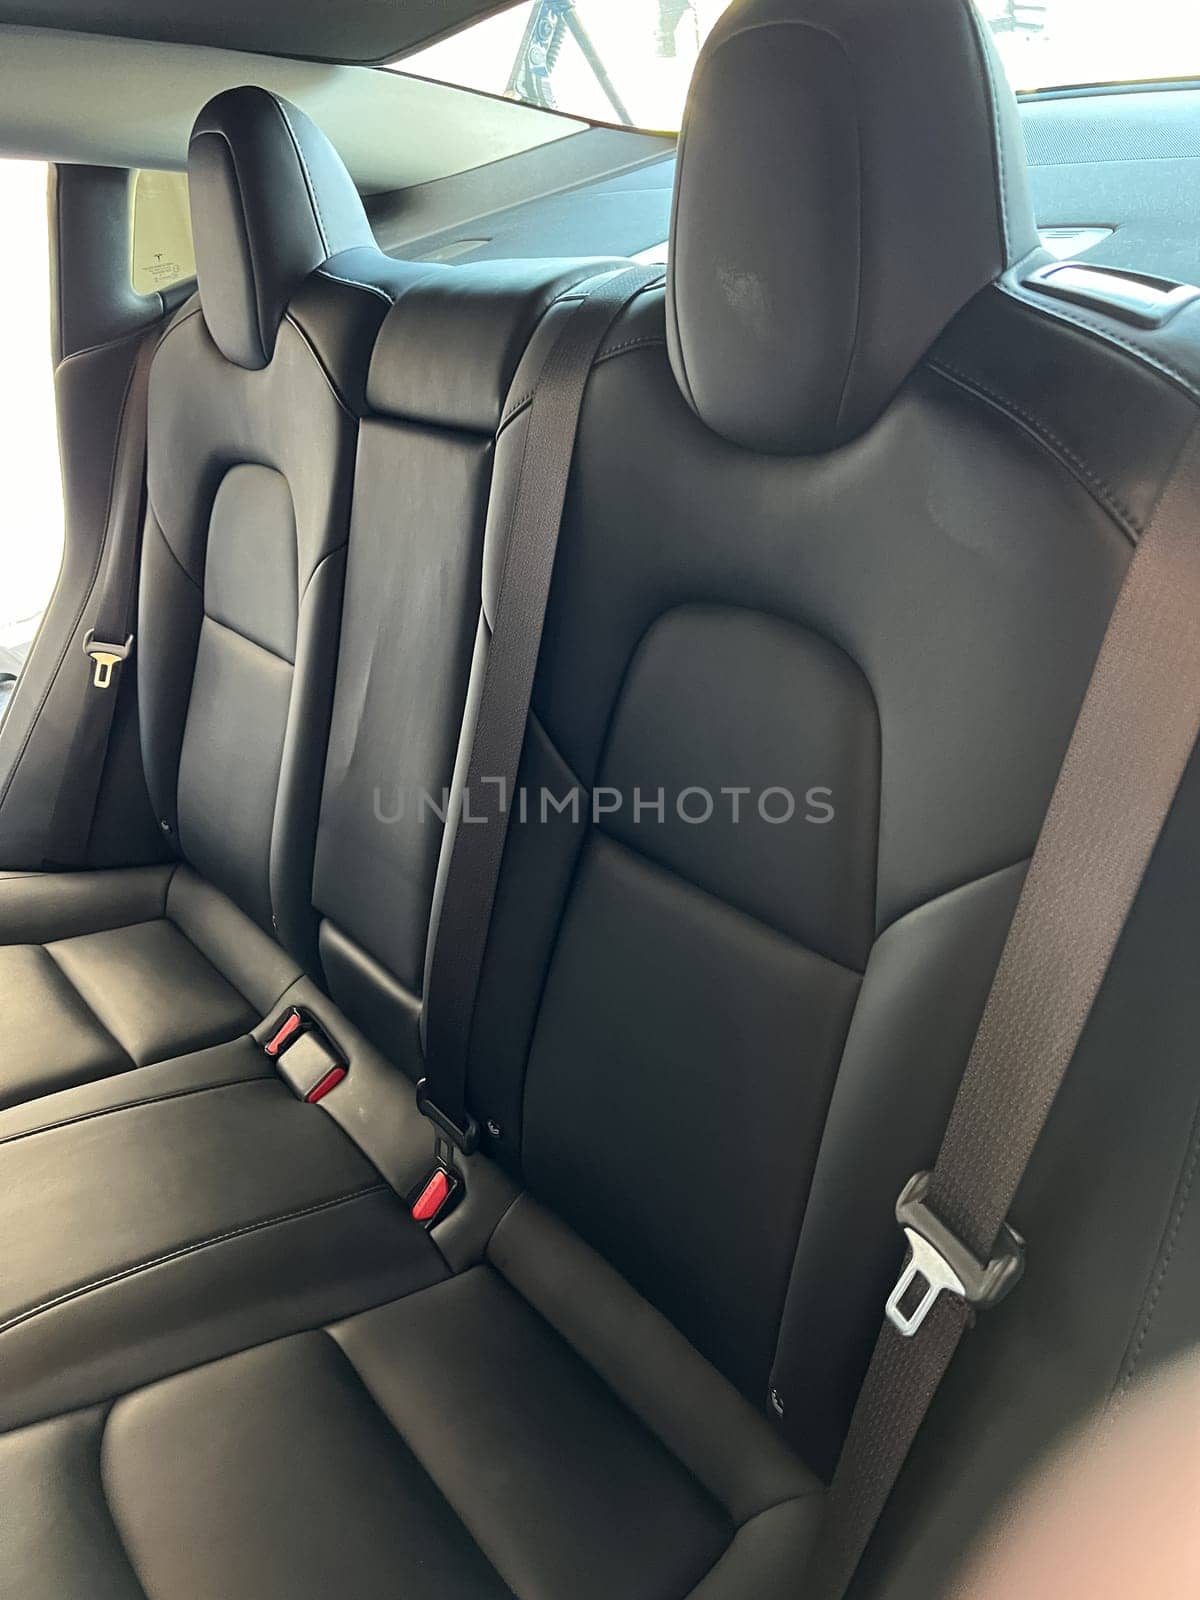 Castle Rock, Colorado, USA-March 14, 2024-The interior of a Tesla Model 3, featuring its premium black seats and modern dashboard, receives a meticulous cleaning in the garage of a private residence.